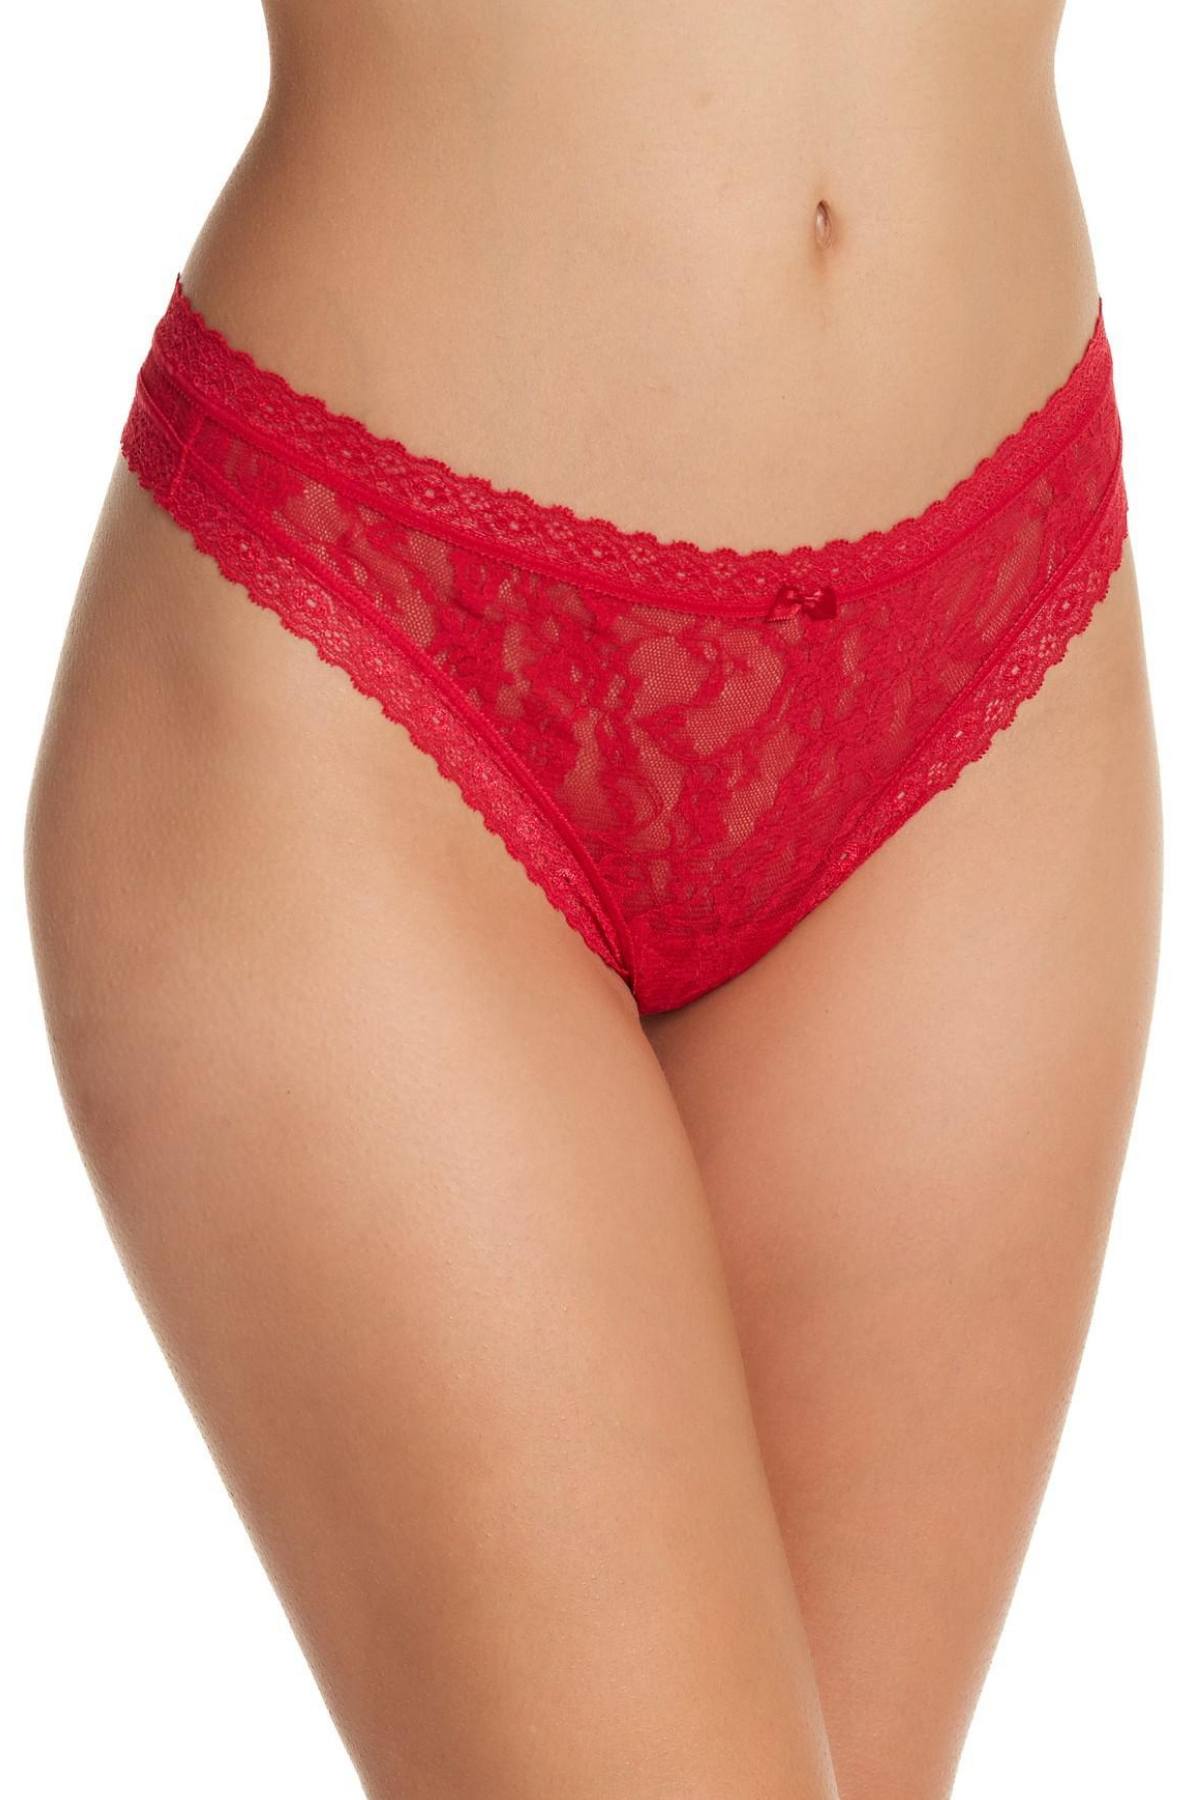 DKNY Red Signature Lace Thong